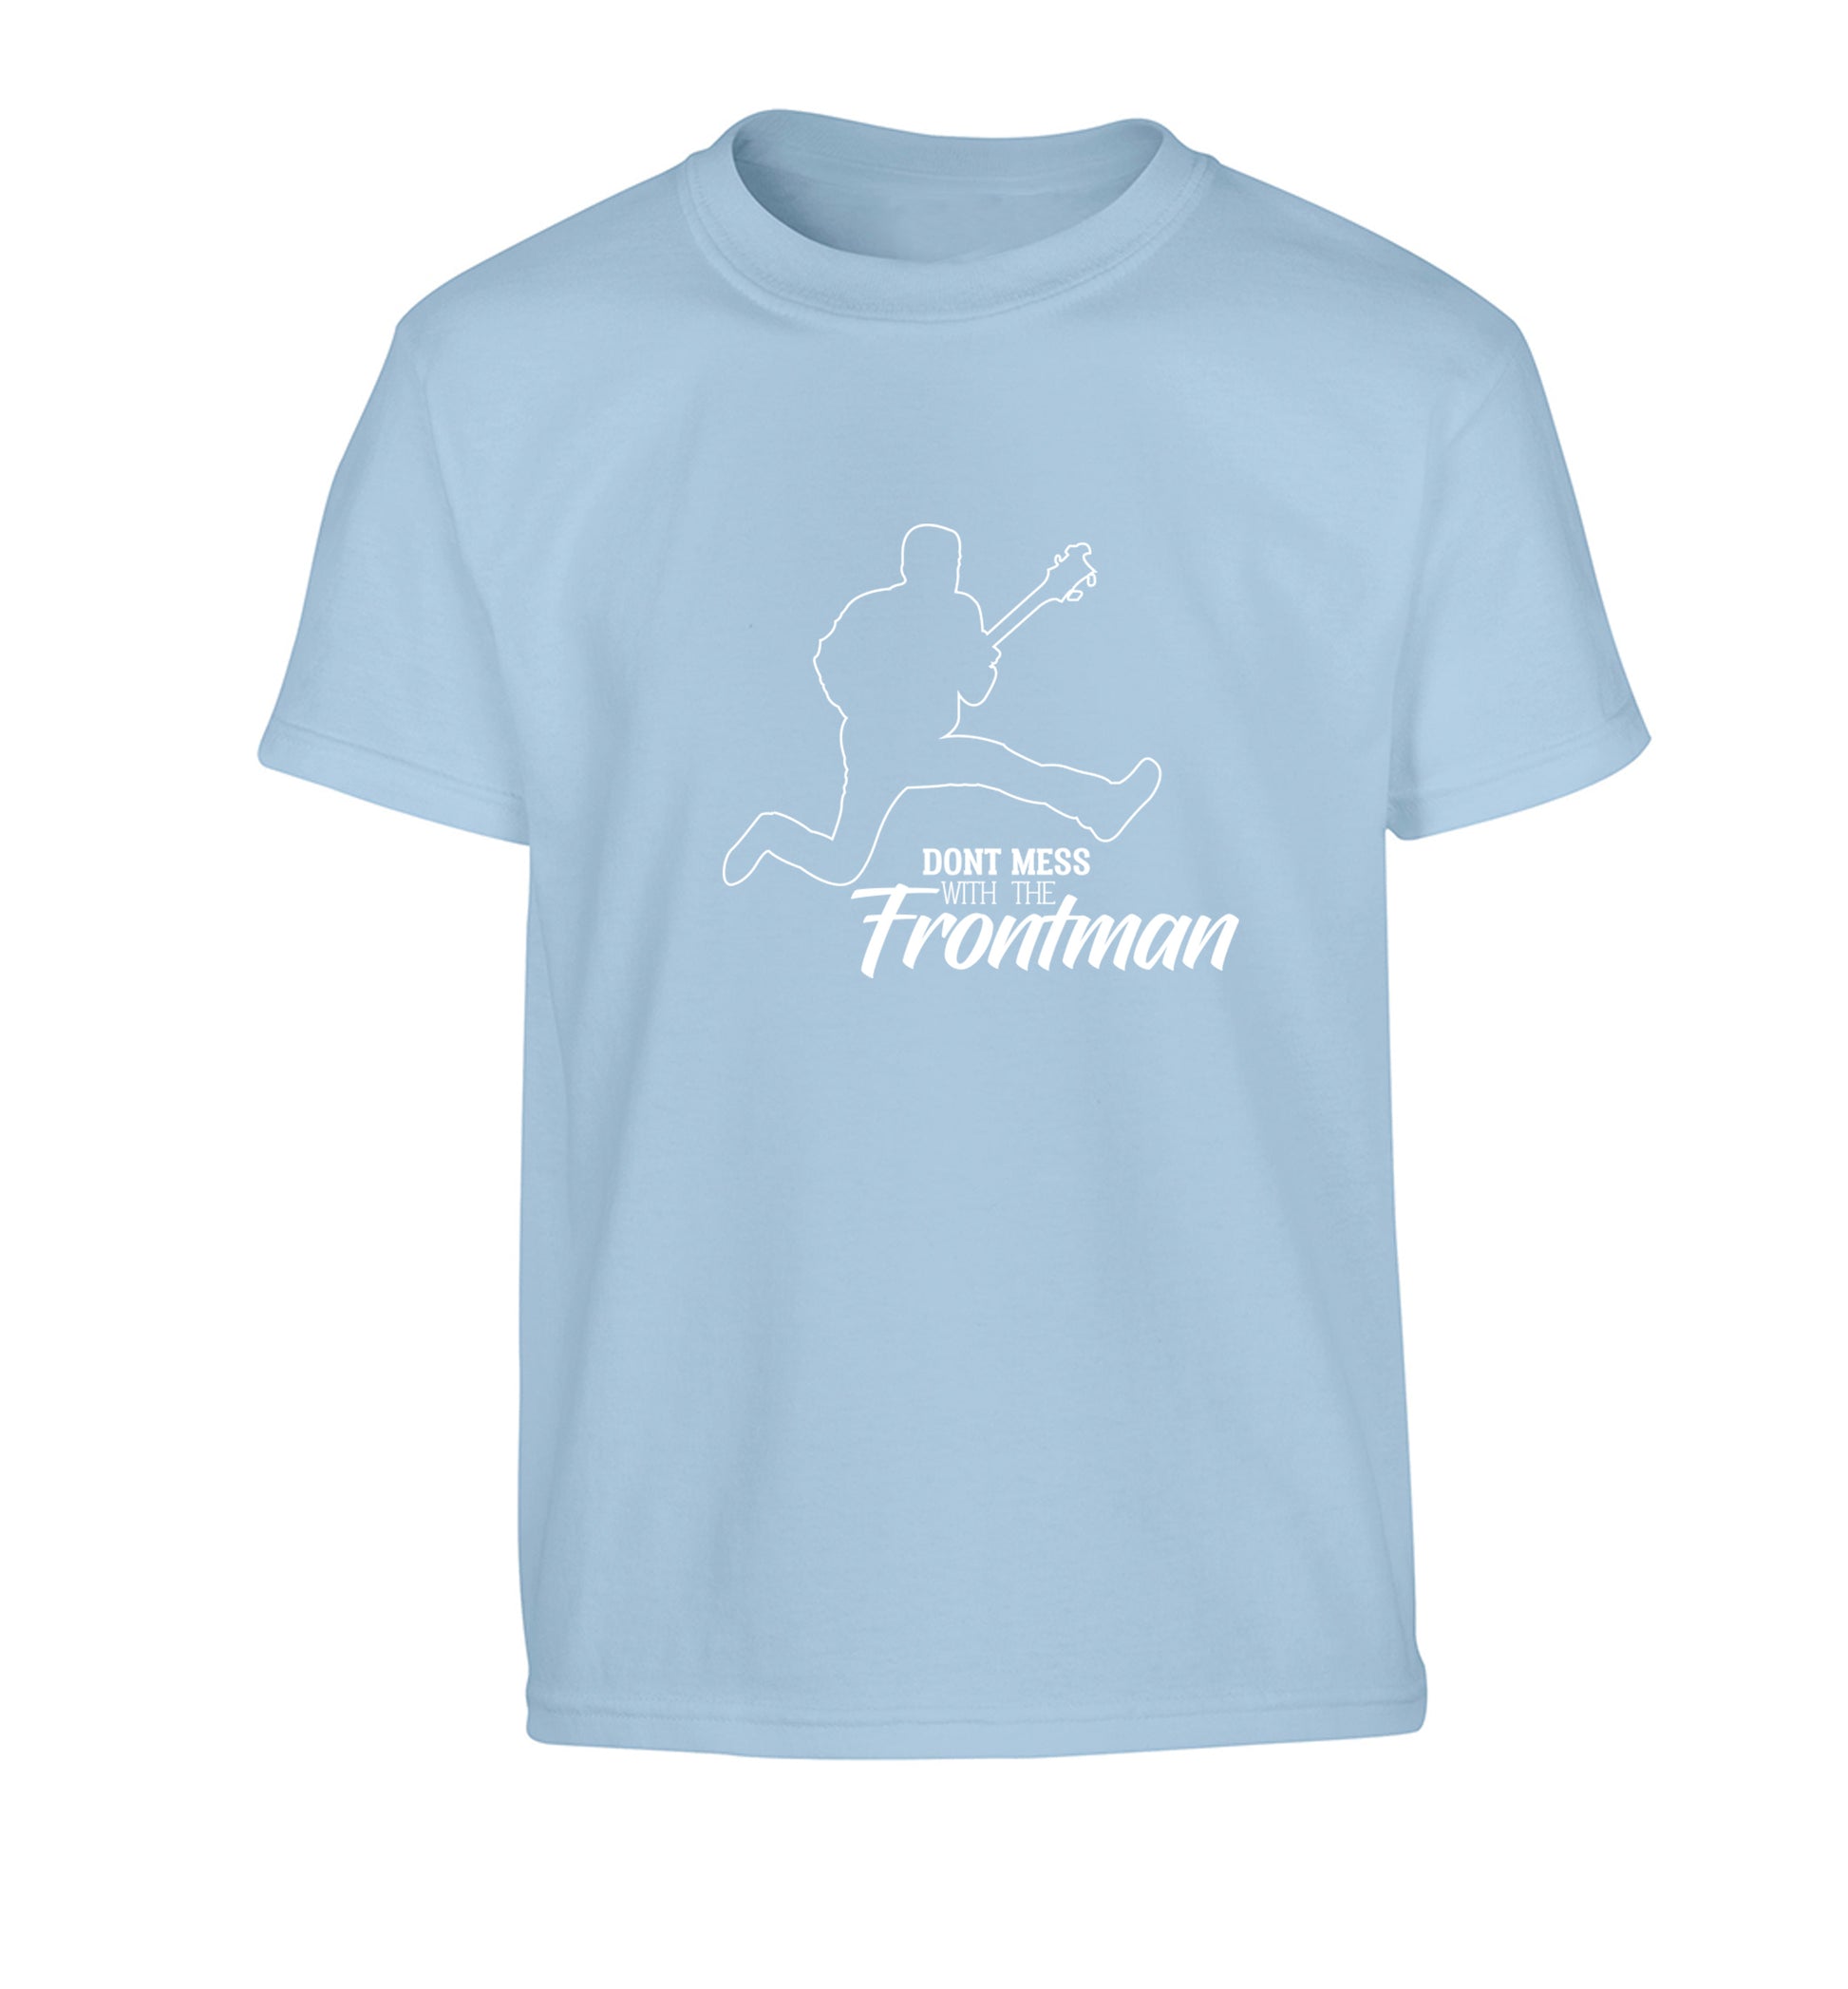 Don't mess with the frontman Children's light blue Tshirt 12-13 Years